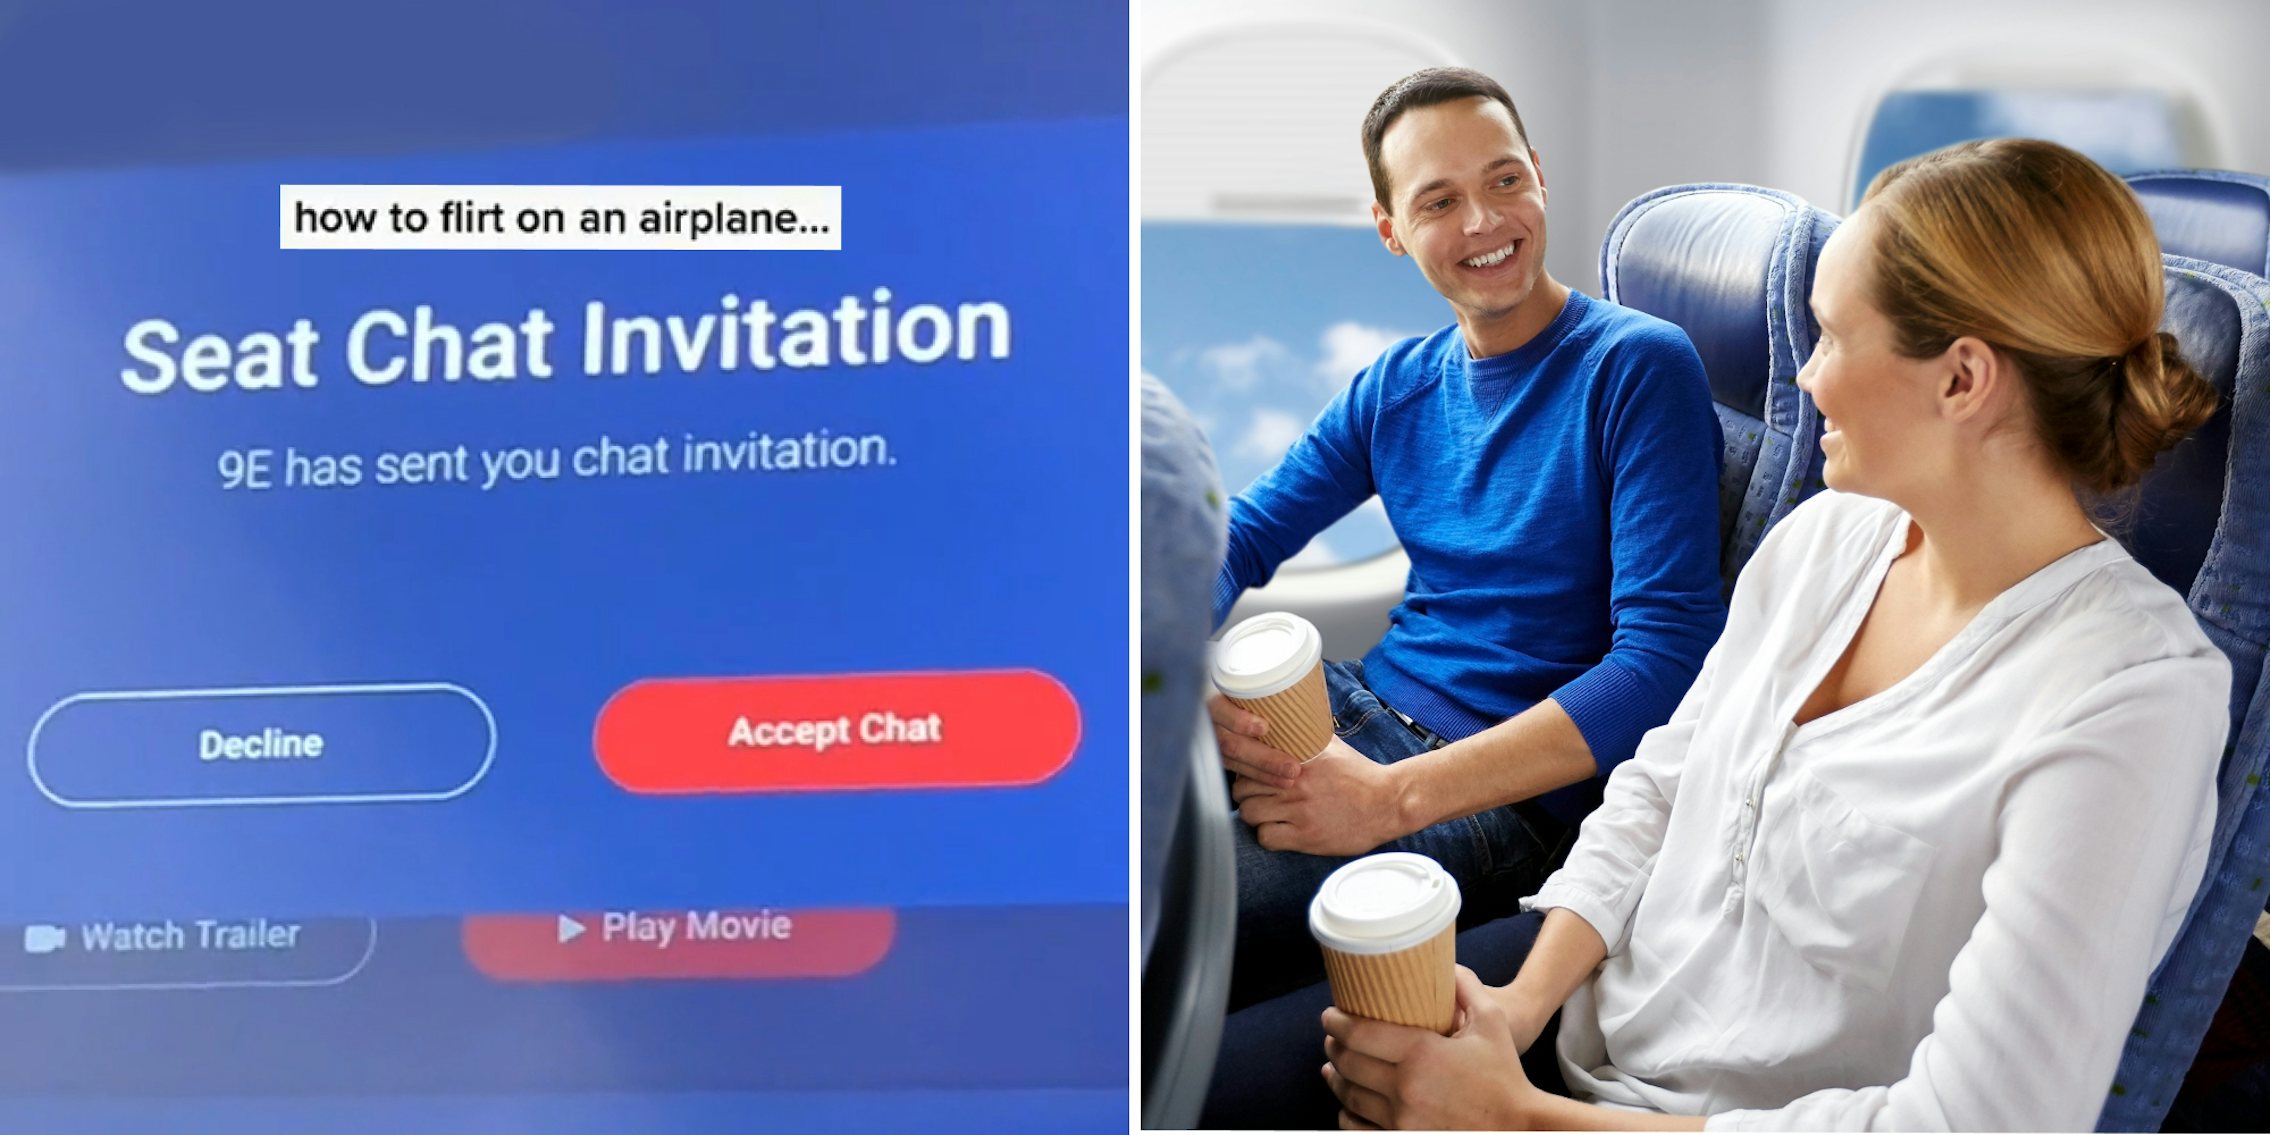 Airplane seat screen 'Seat Chat Invitation 9E has sent you a chat invitation decline accept' caption 'how to flirt on an airplane' (l) man and woman sitting on plane talking coffee in hands (r)